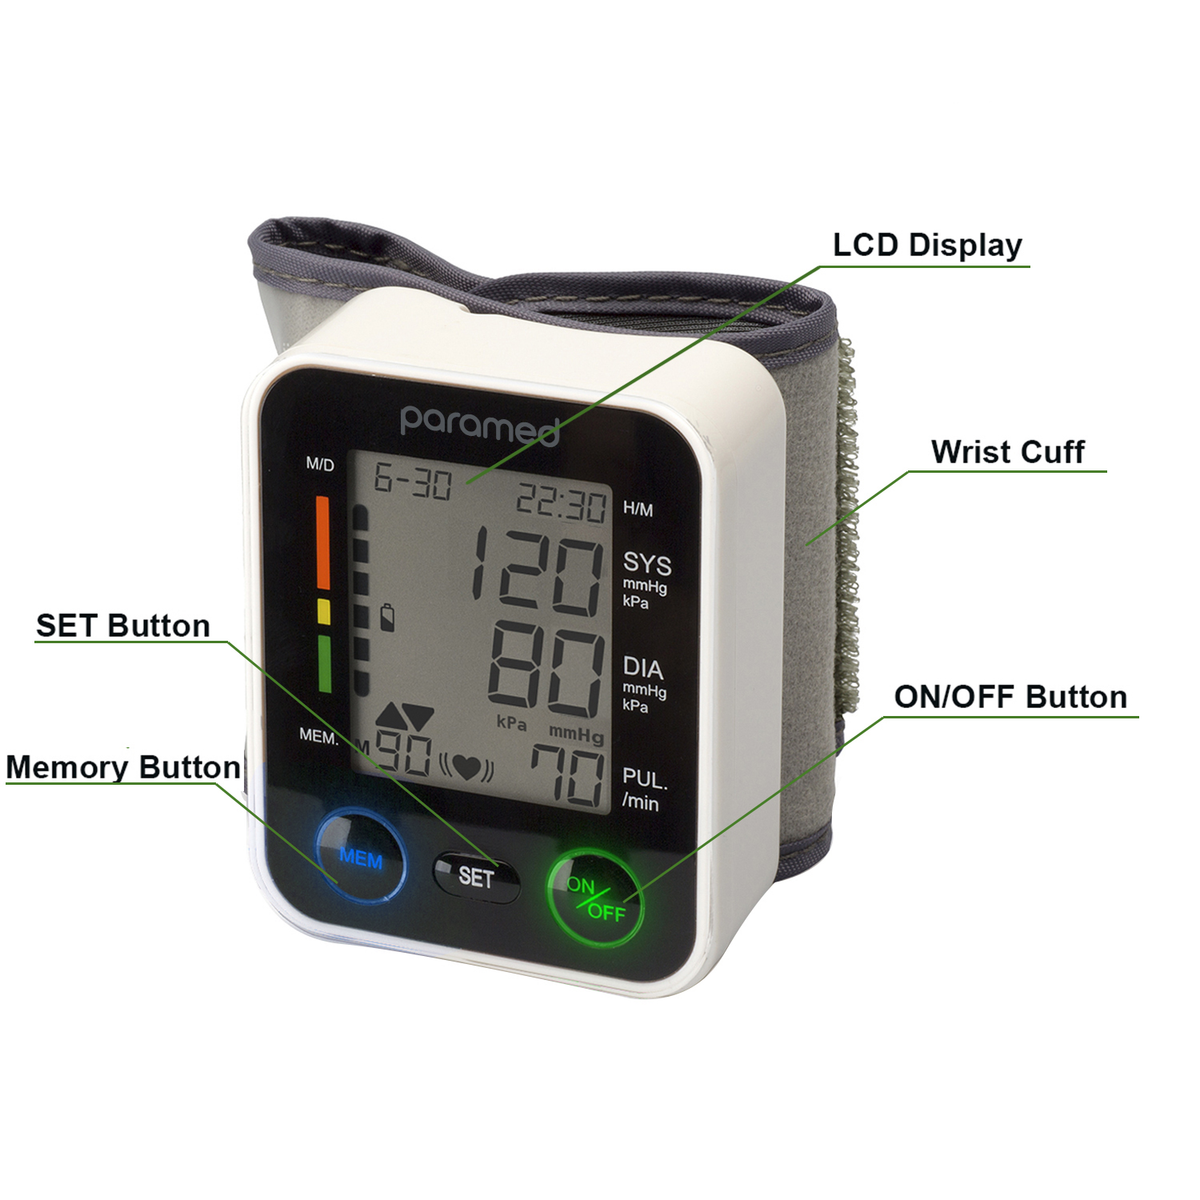 Paramed B22S Blood Pressure Monitor Free Shipping